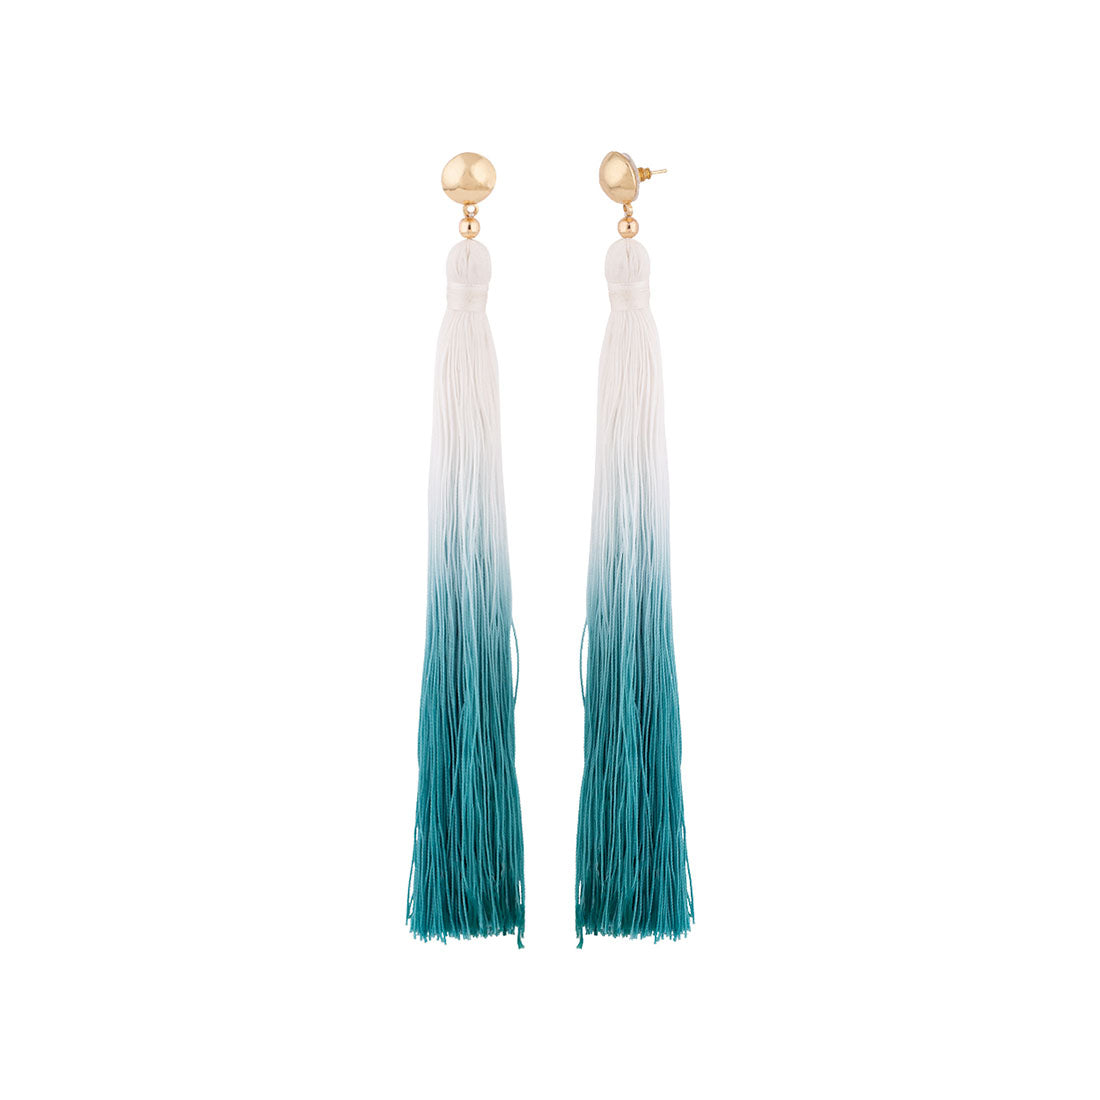 Ombre White and Green Earrings